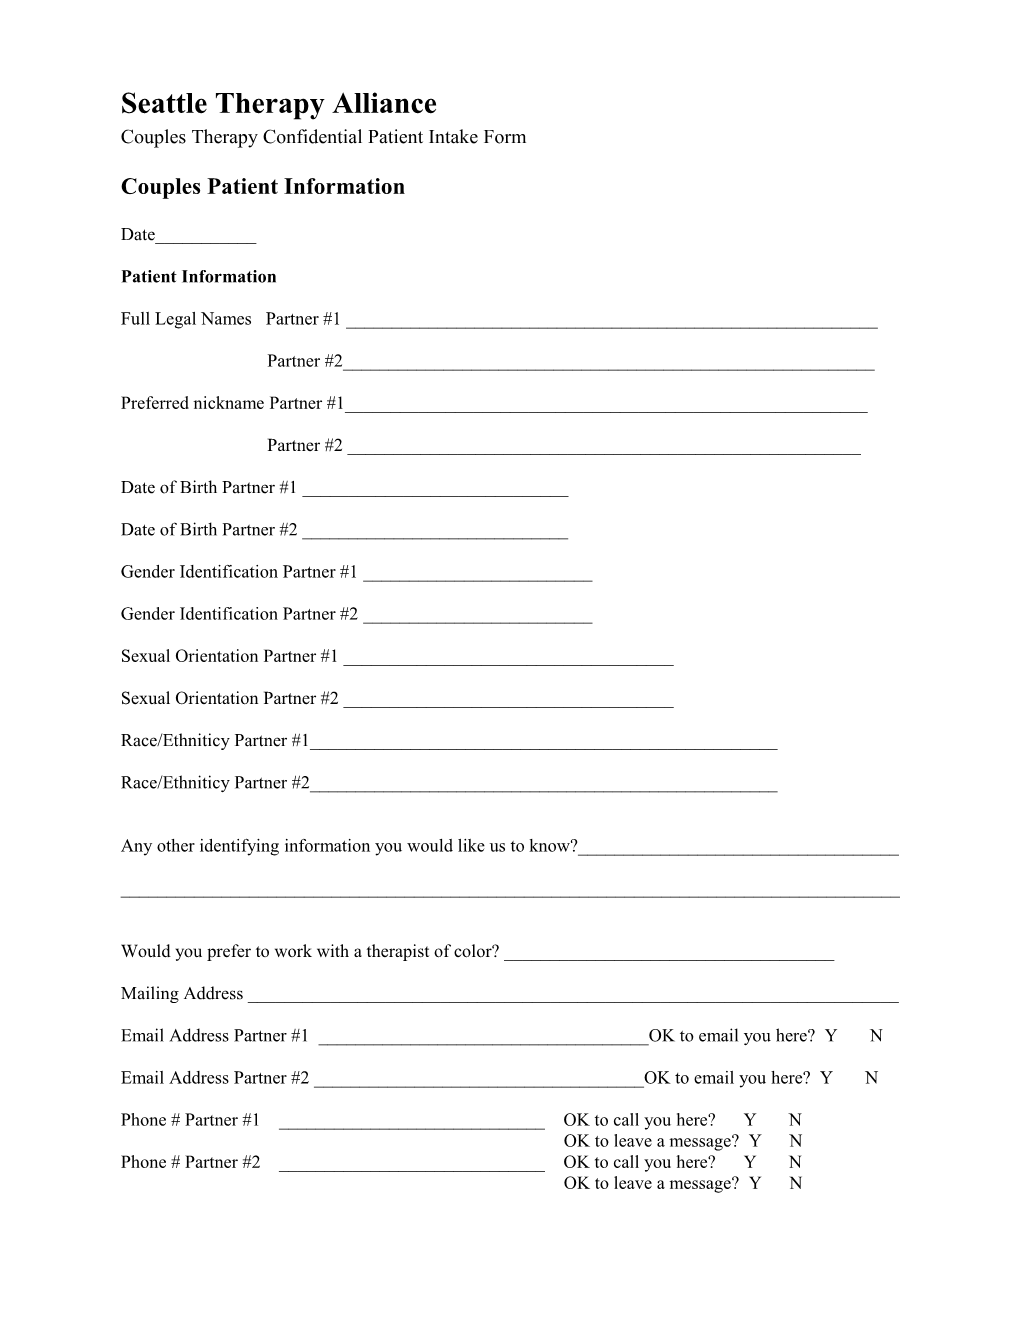 STA COUPLES Confidential Intake Form